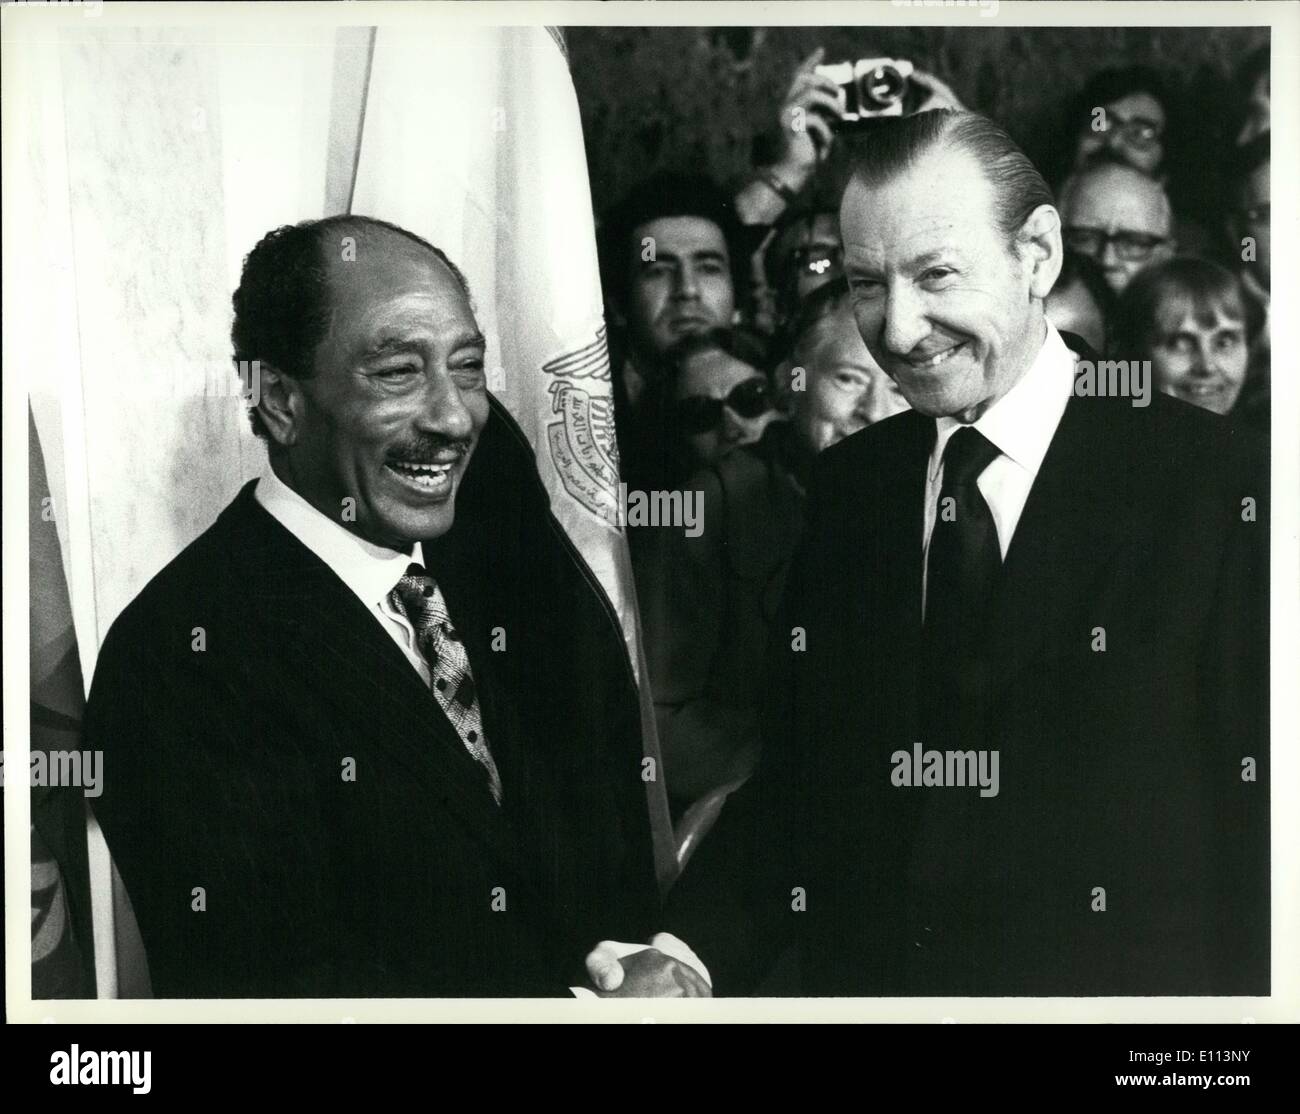 Oct. 10, 1975 - President of Egypt Pays Official Visit to UN Headquarters: The President of Egypt, Mohamed Anwar El-Sadat paid an official visit to United Nations Headquarters today to confer with Secretary-General Kurt Waldheim and address the General Assembly. During the visit, President El-Sadat met with the Chairmen of delegations to the General Assembly and attenden a luncheon given in his honour by the Secretary-General. President El-Sadat being greeted by Secretary-General Kurt Walheim in the Secretariat lobby. Stock Photo